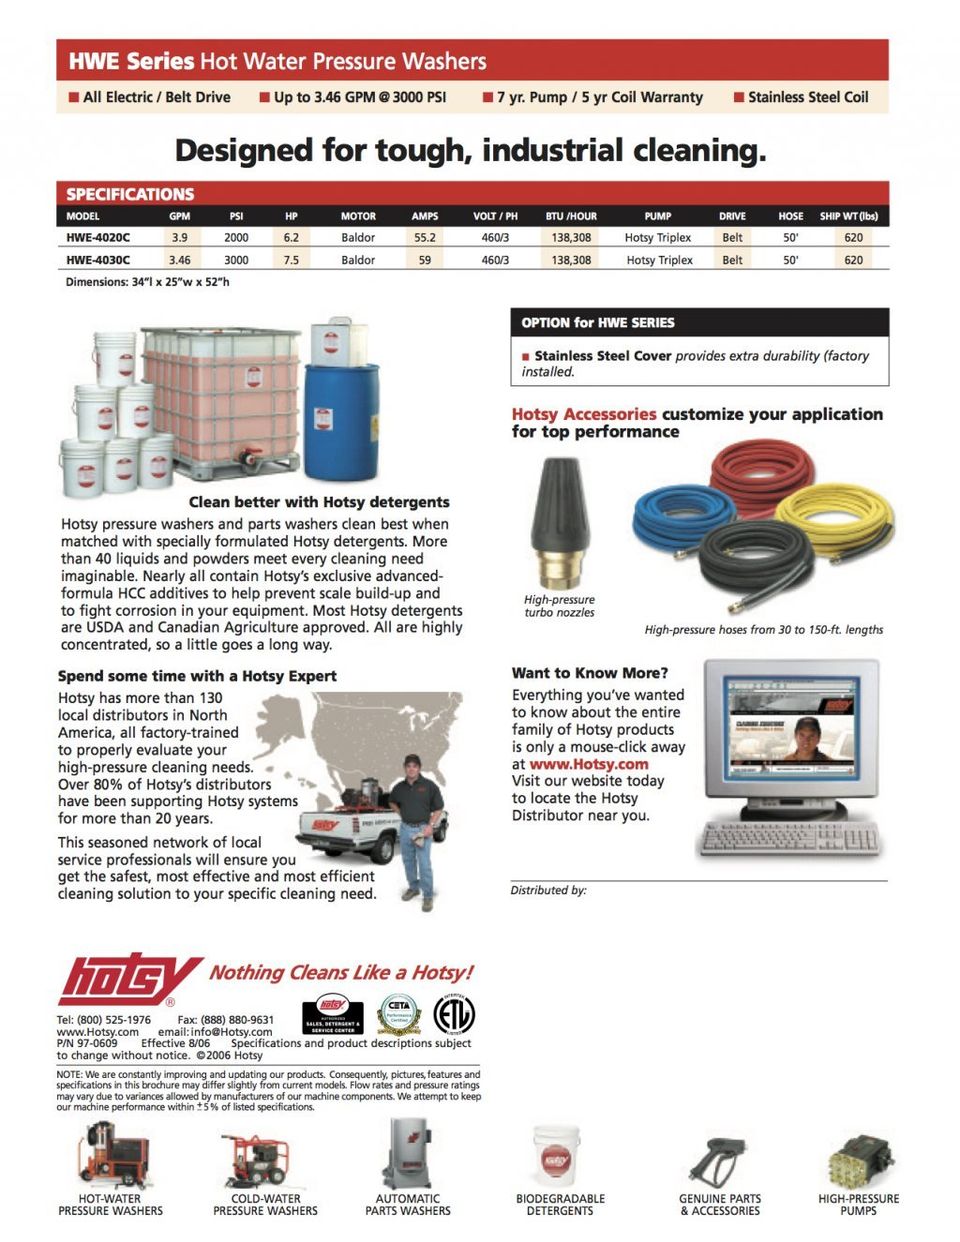 Hotsy Hot Water Pressure Washer HWE Series Product Sheet -- Page 1